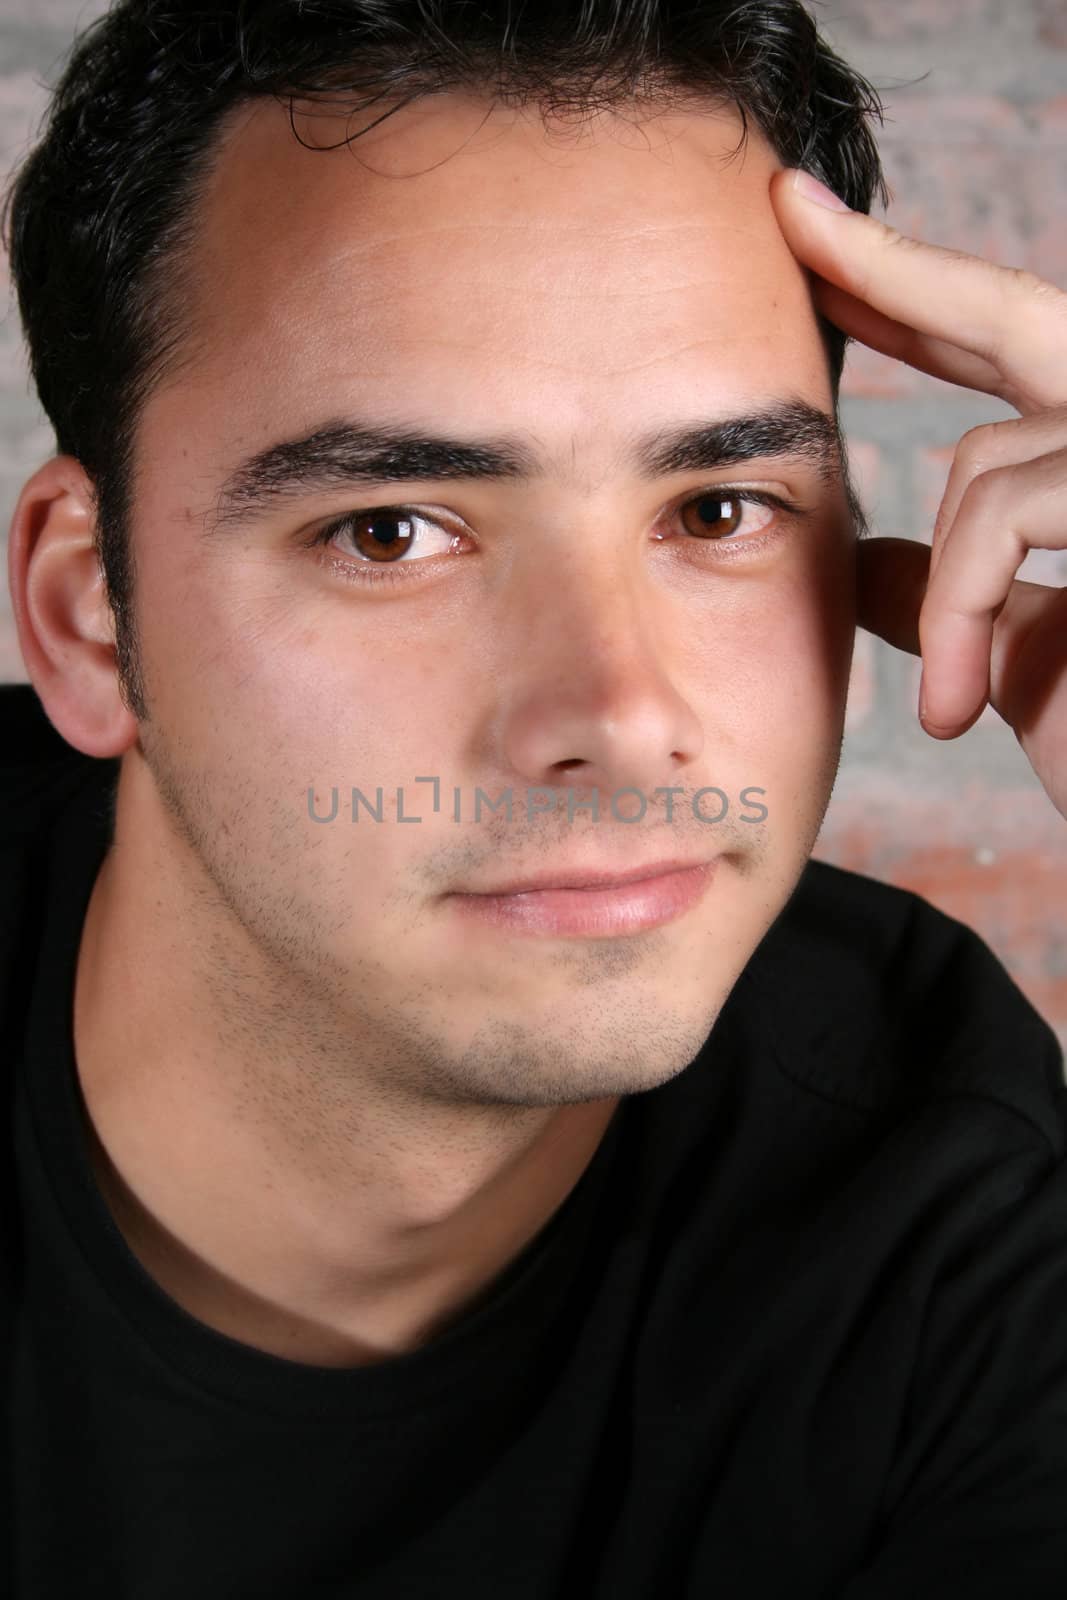 Male model against a rough brick wall background